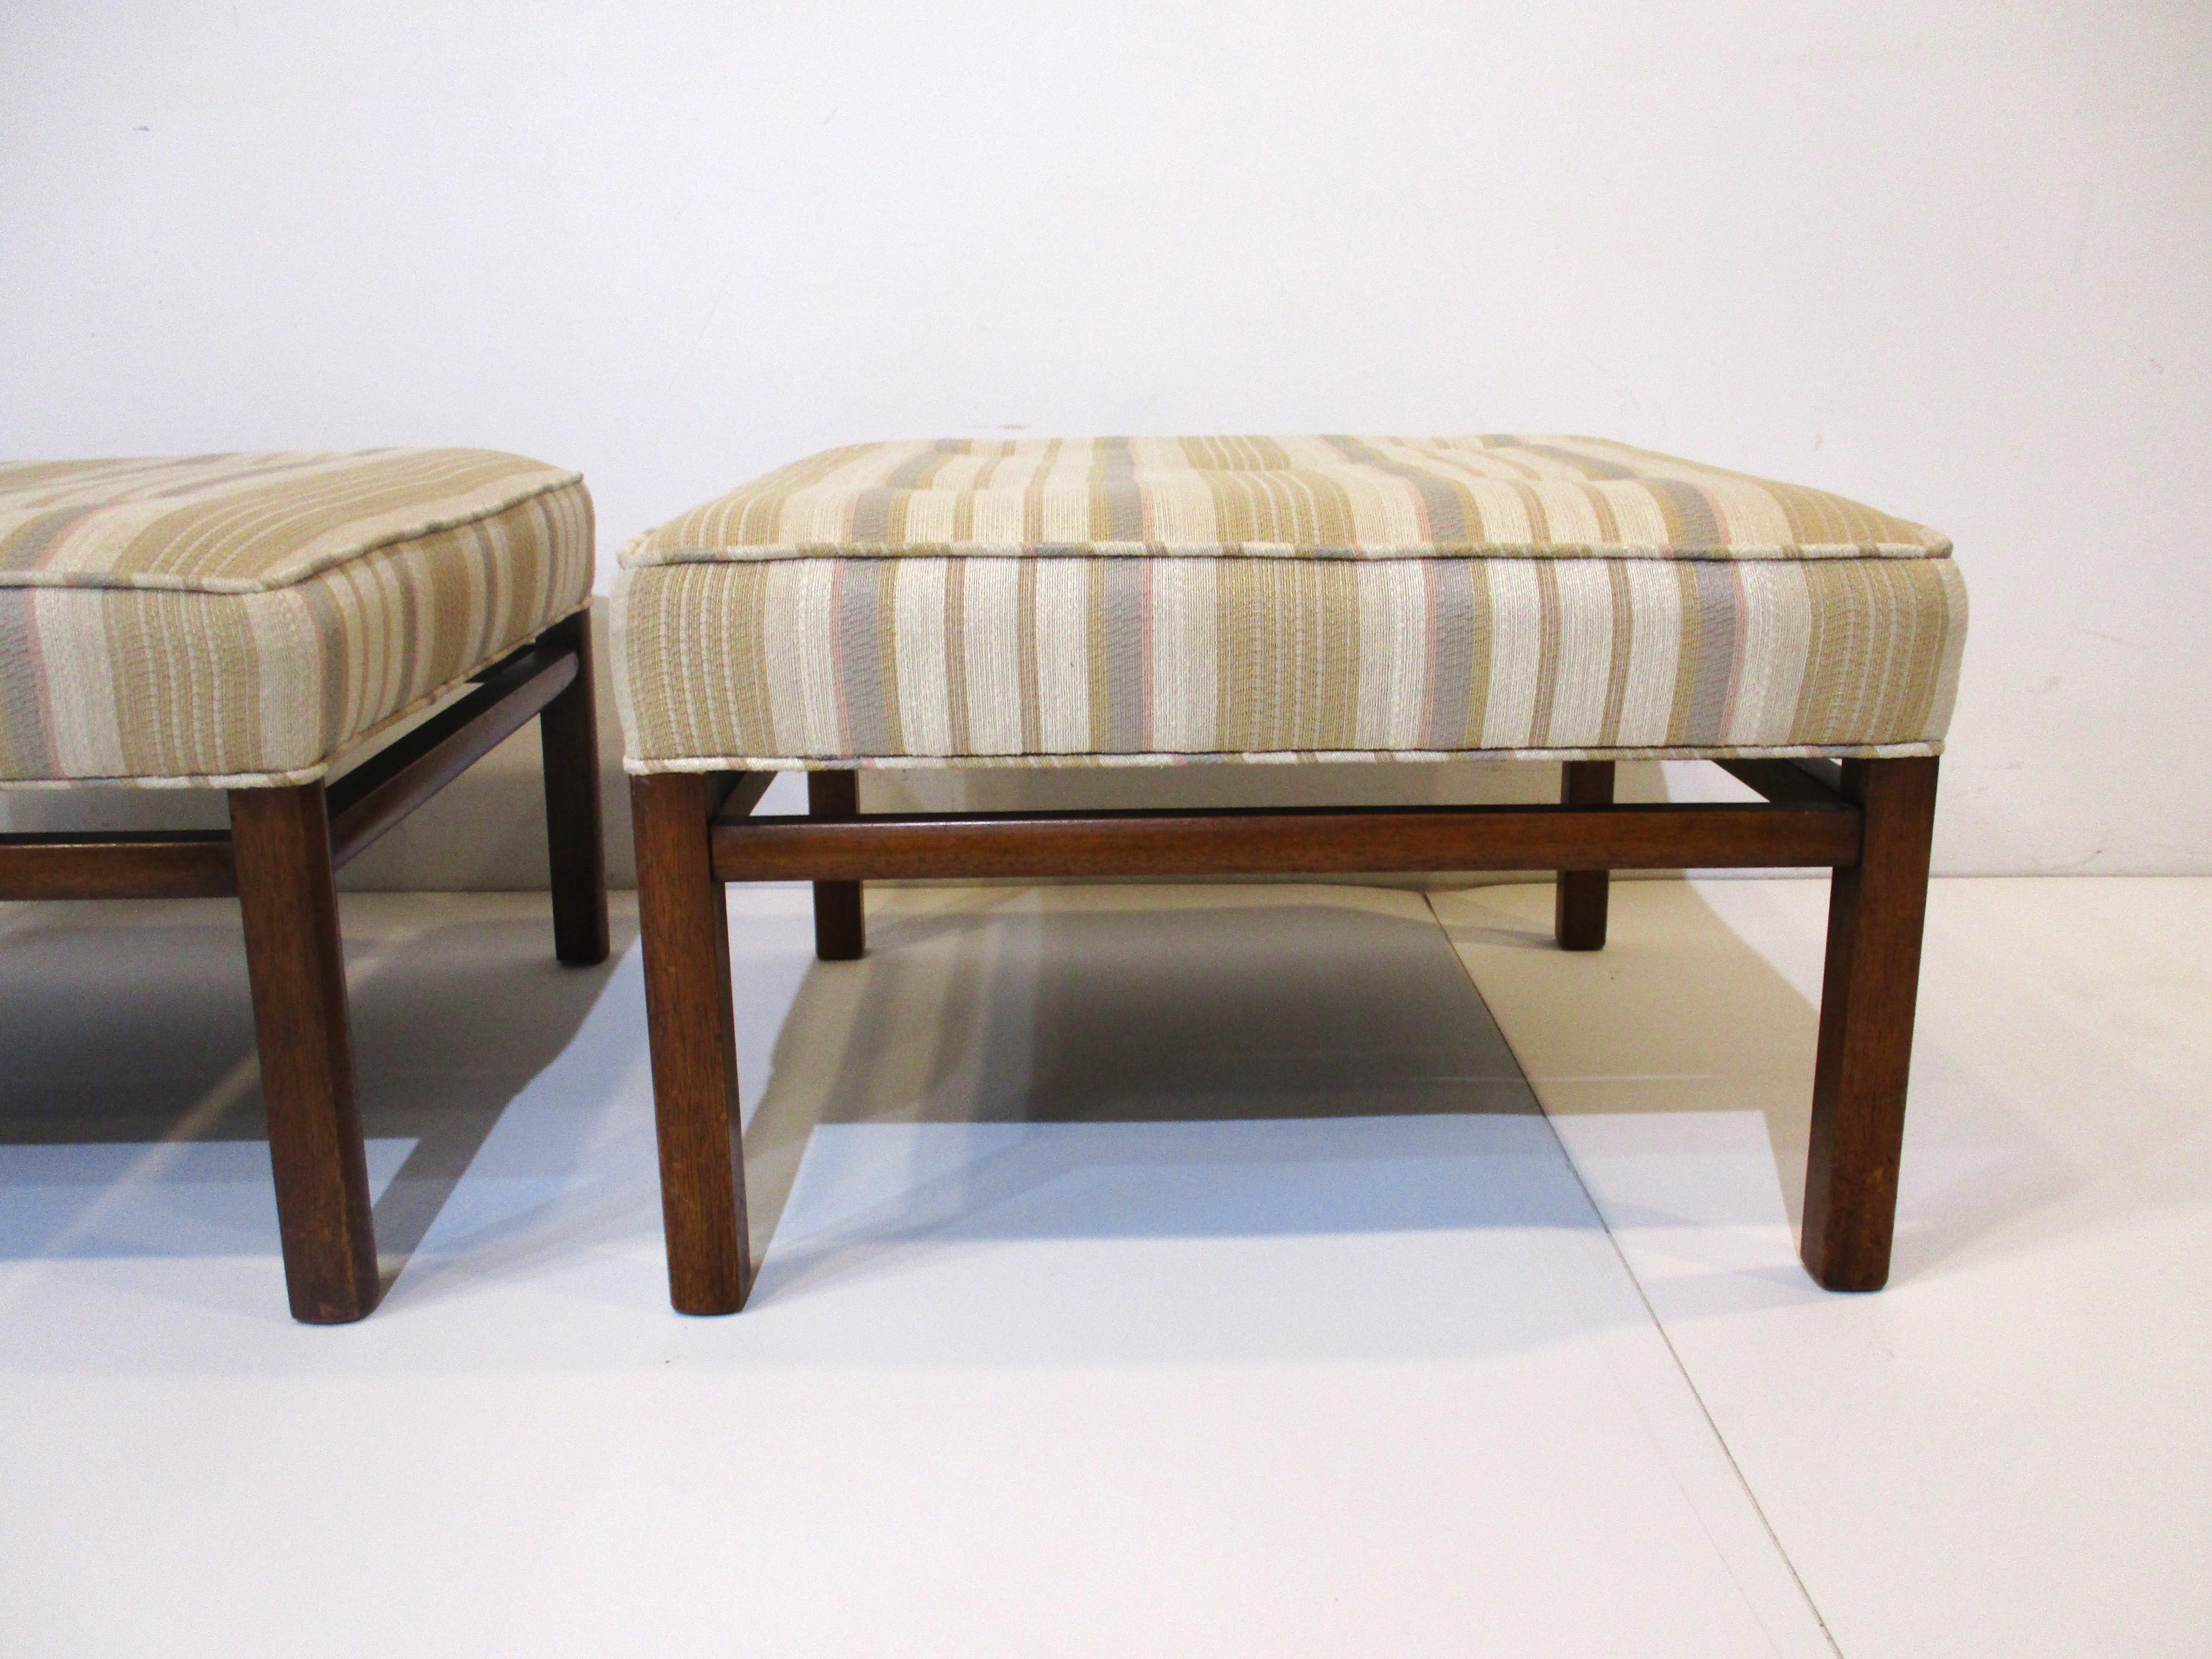 American Upholstered Ottomans / Stools in the Style of Harvery Probber